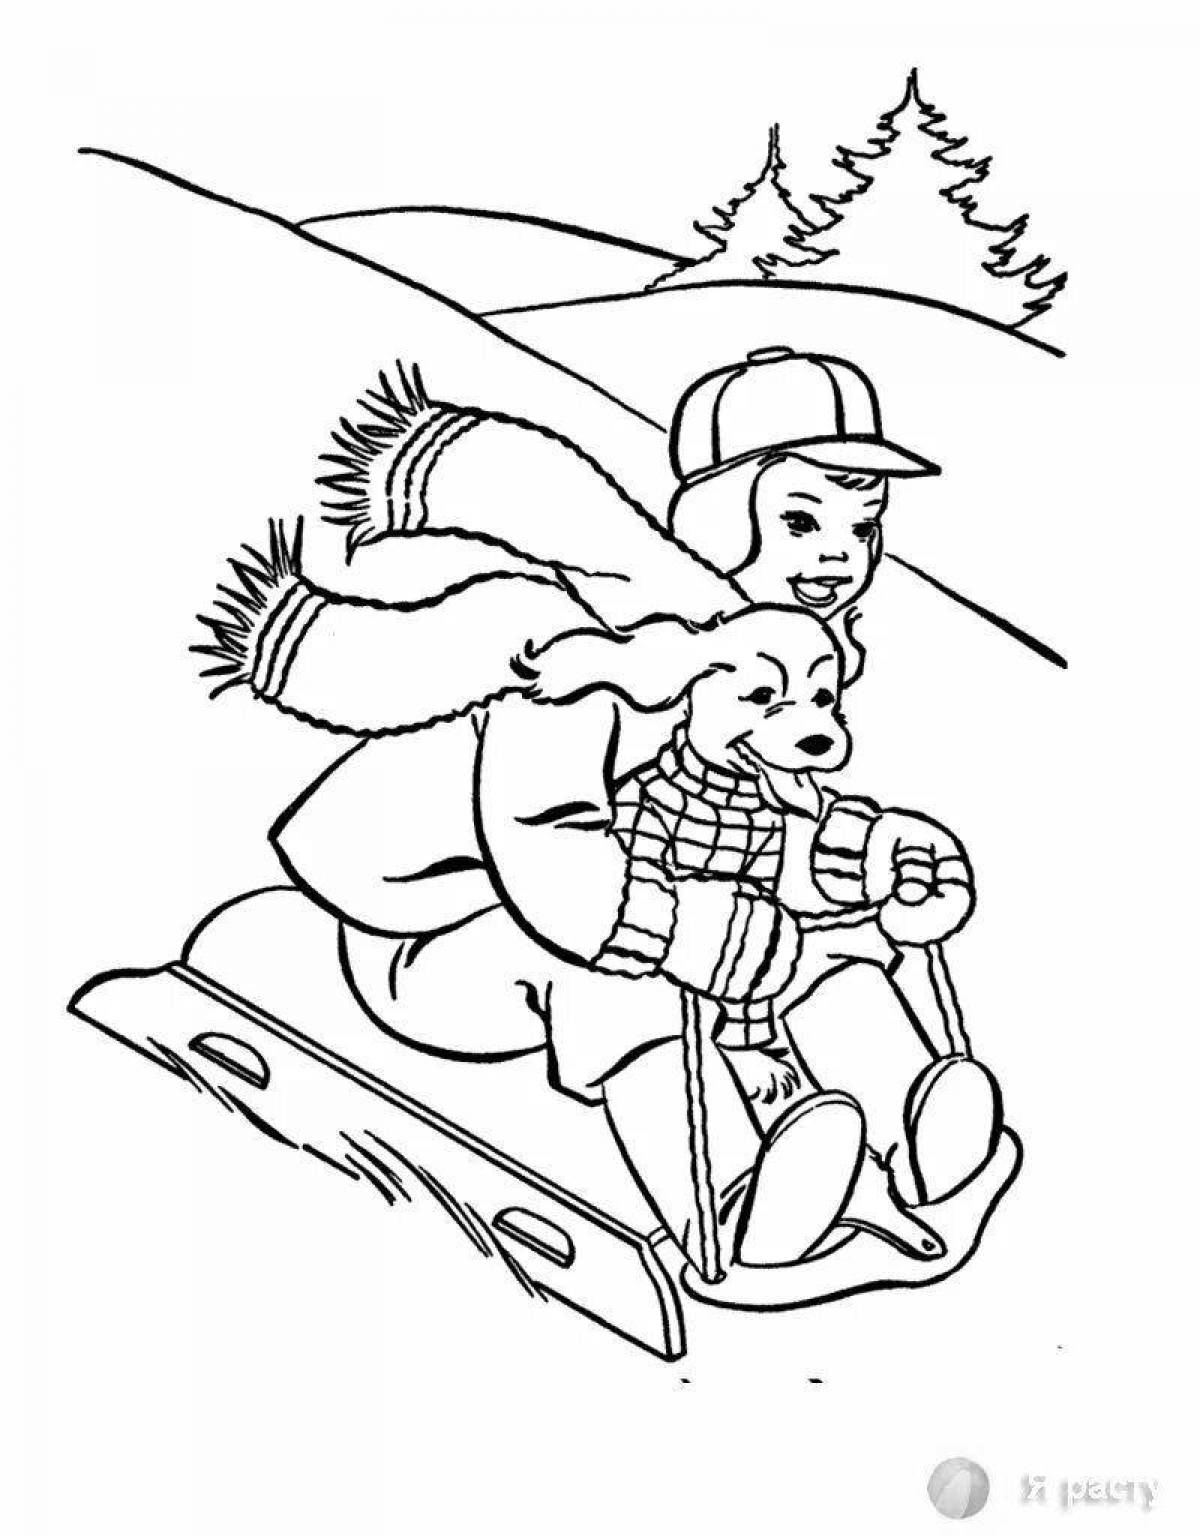 February magical coloring page